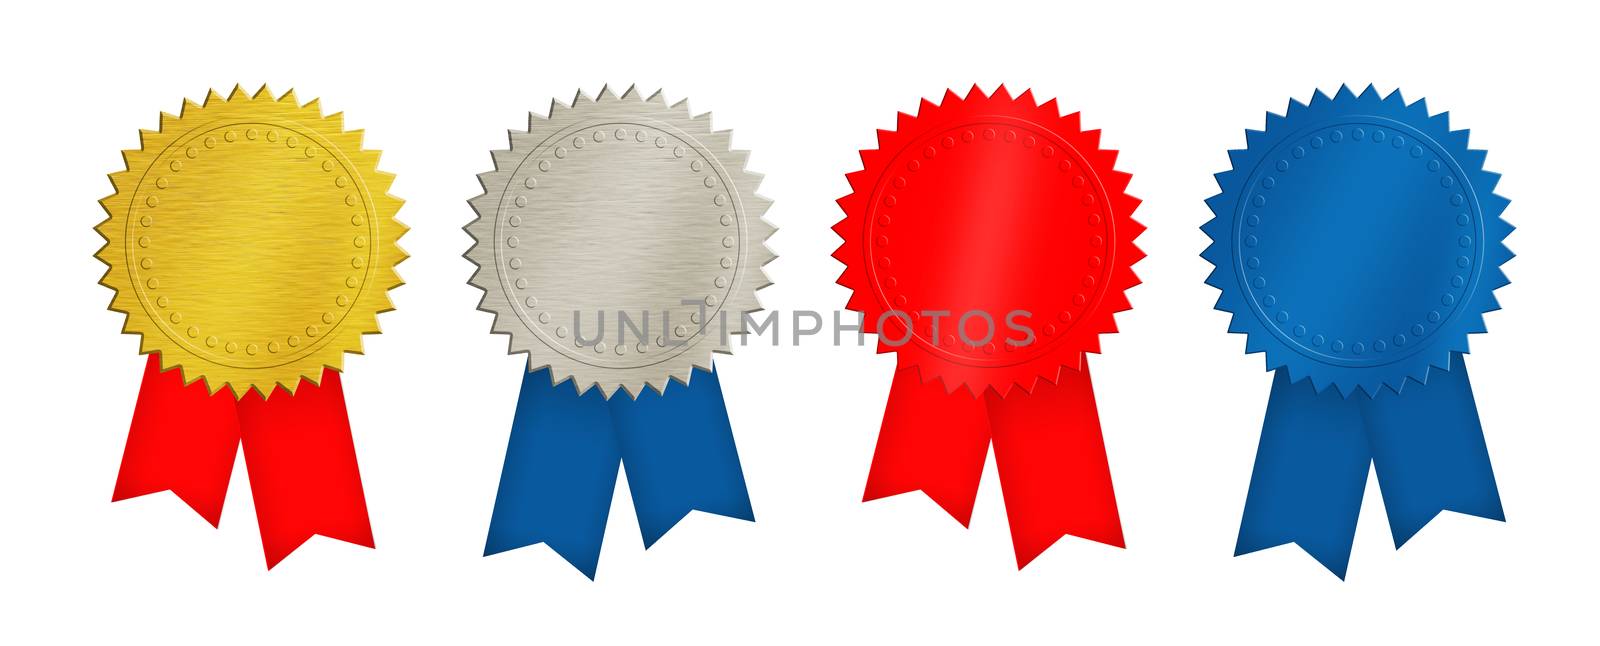 Set of four seal stamps, achievement and award badges (brushed metal gold, silver, blue and red) with double ribbons isolated on white background